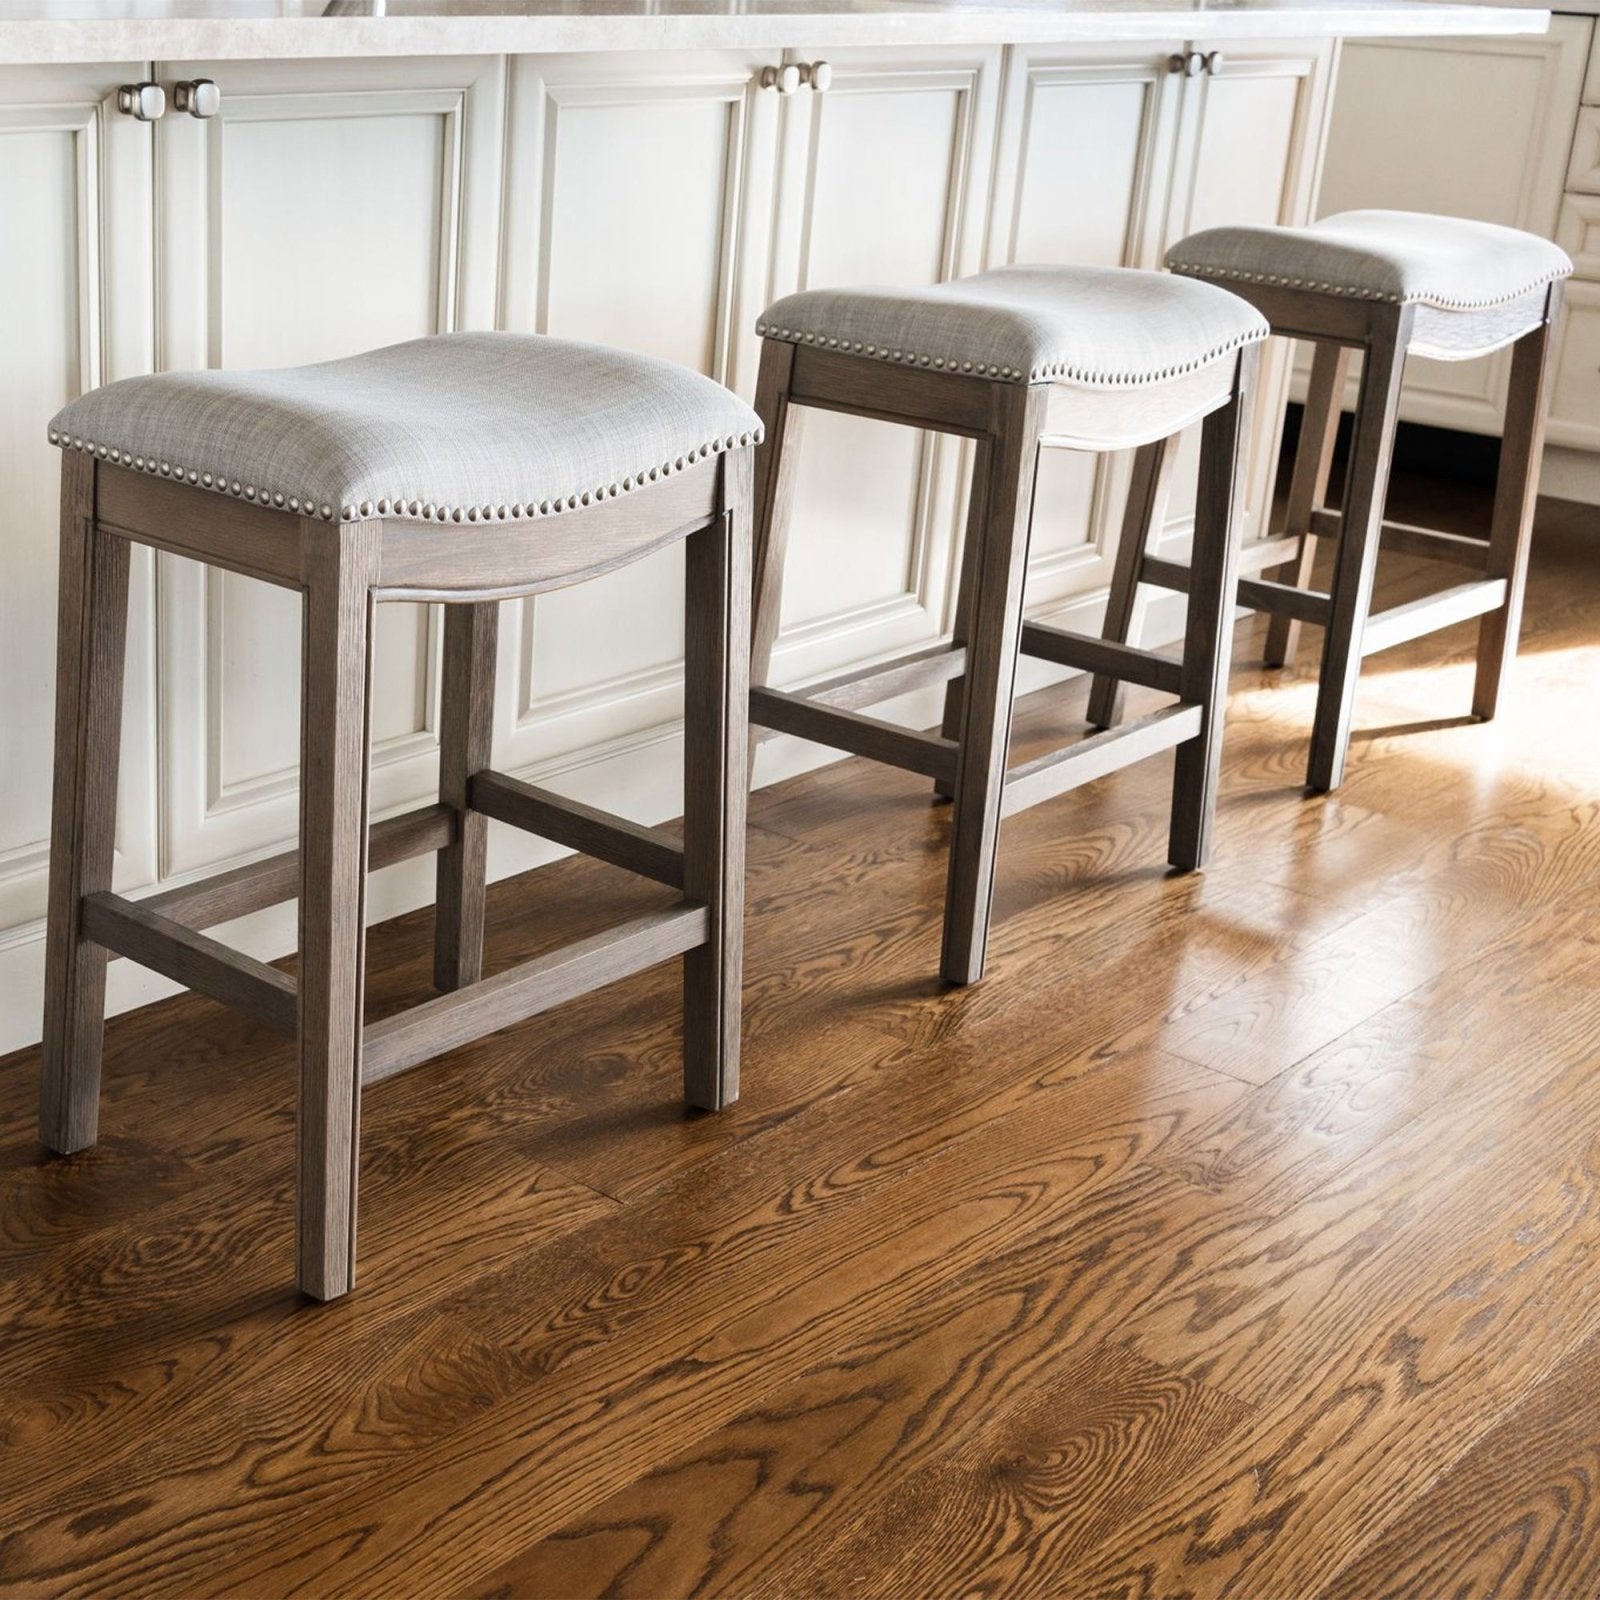 Adrien Saddle Bar Stool in Reclaimed Oak Finish with Ash Grey Fabric Upholstery in Stools by Maven Lane